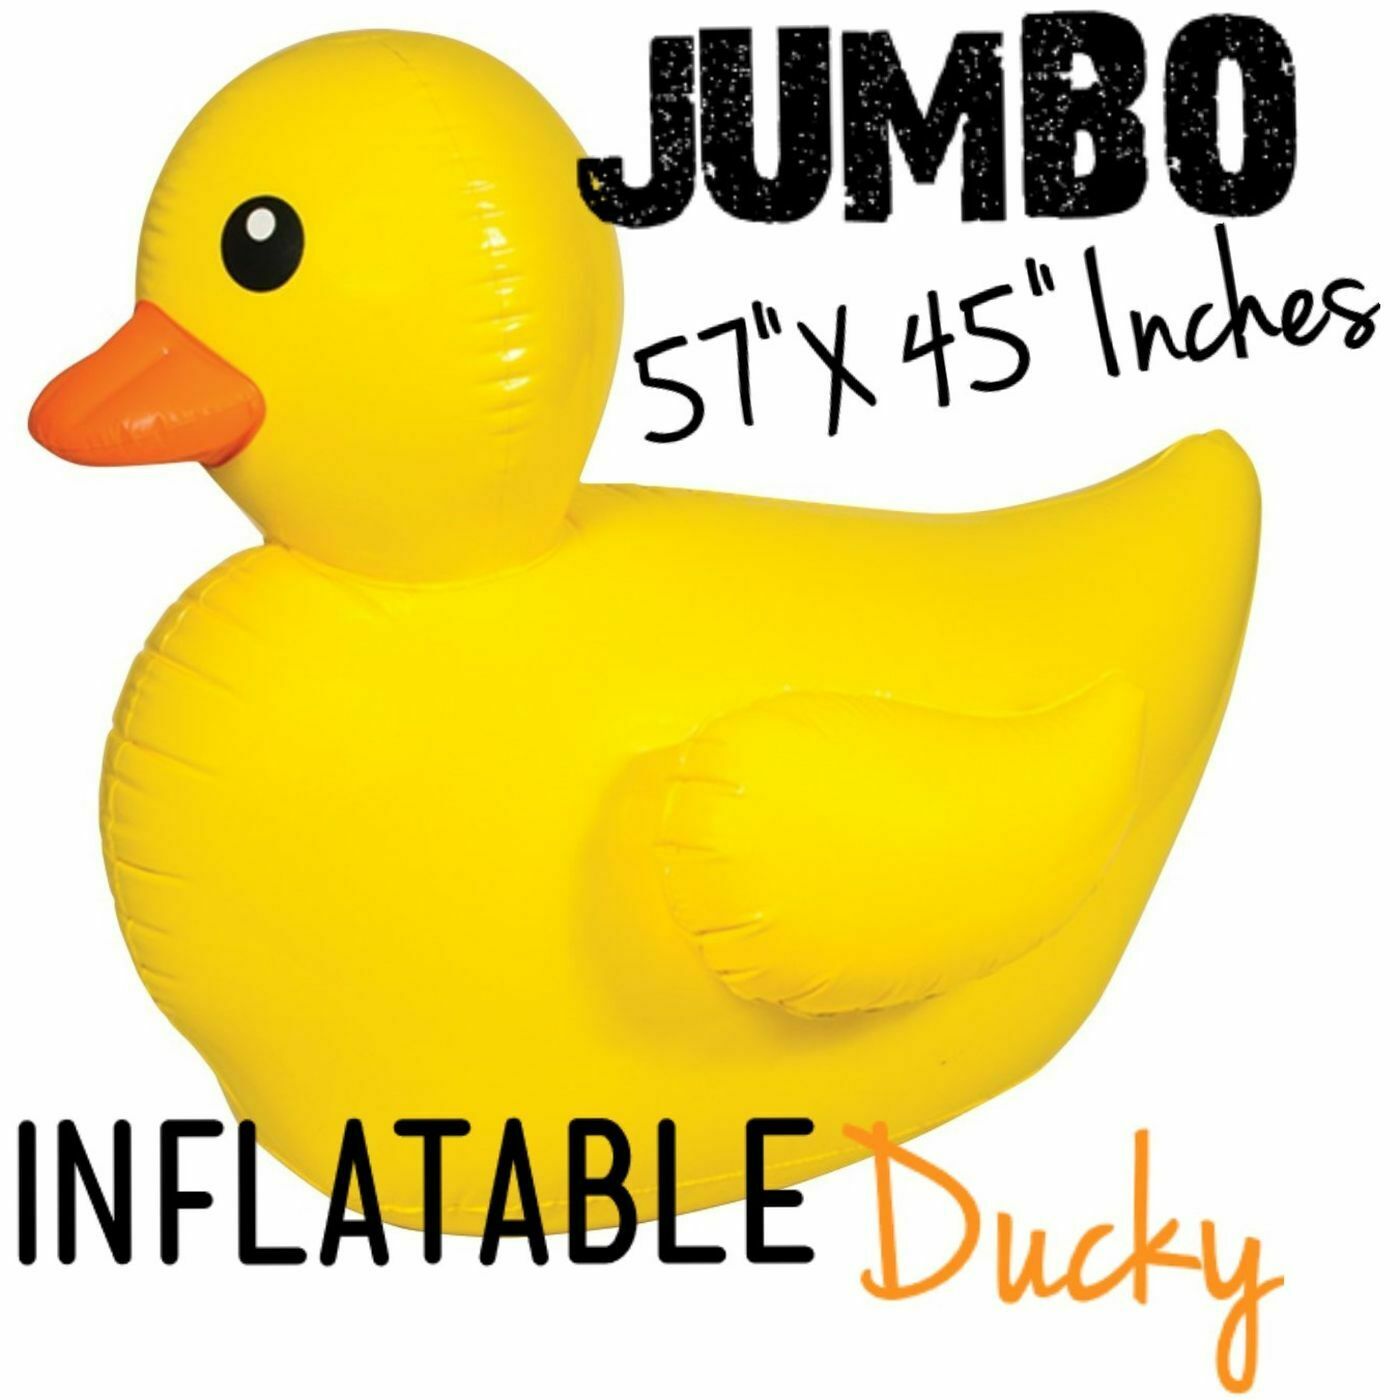 HUGE DUCKY Inflatable Float - Cute Rubber Duck Blow Up Pool Party Decoration Toy